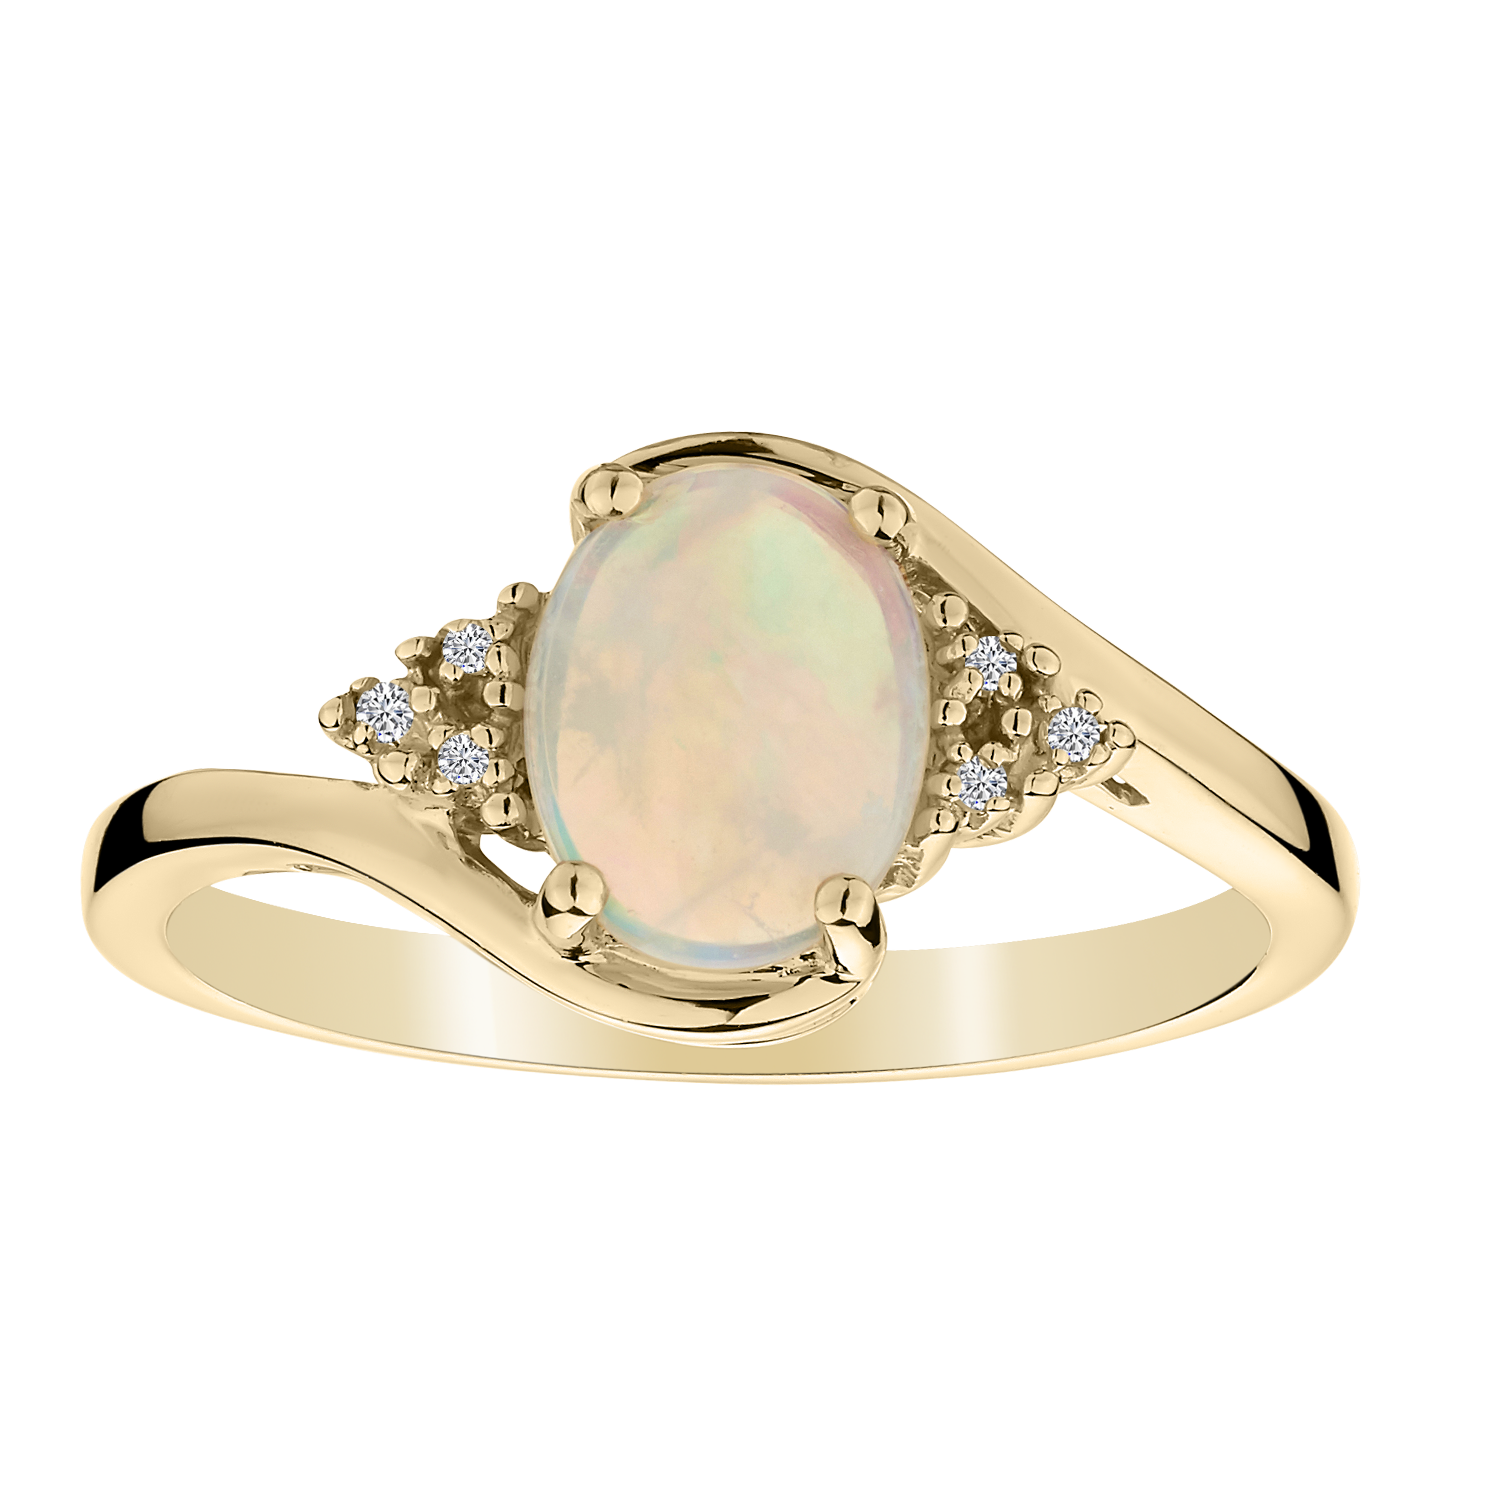 Genuine Opal Diamond Ring,  10kt Yellow Gold. Gemstone Rings. Griffin Jewellery Designs